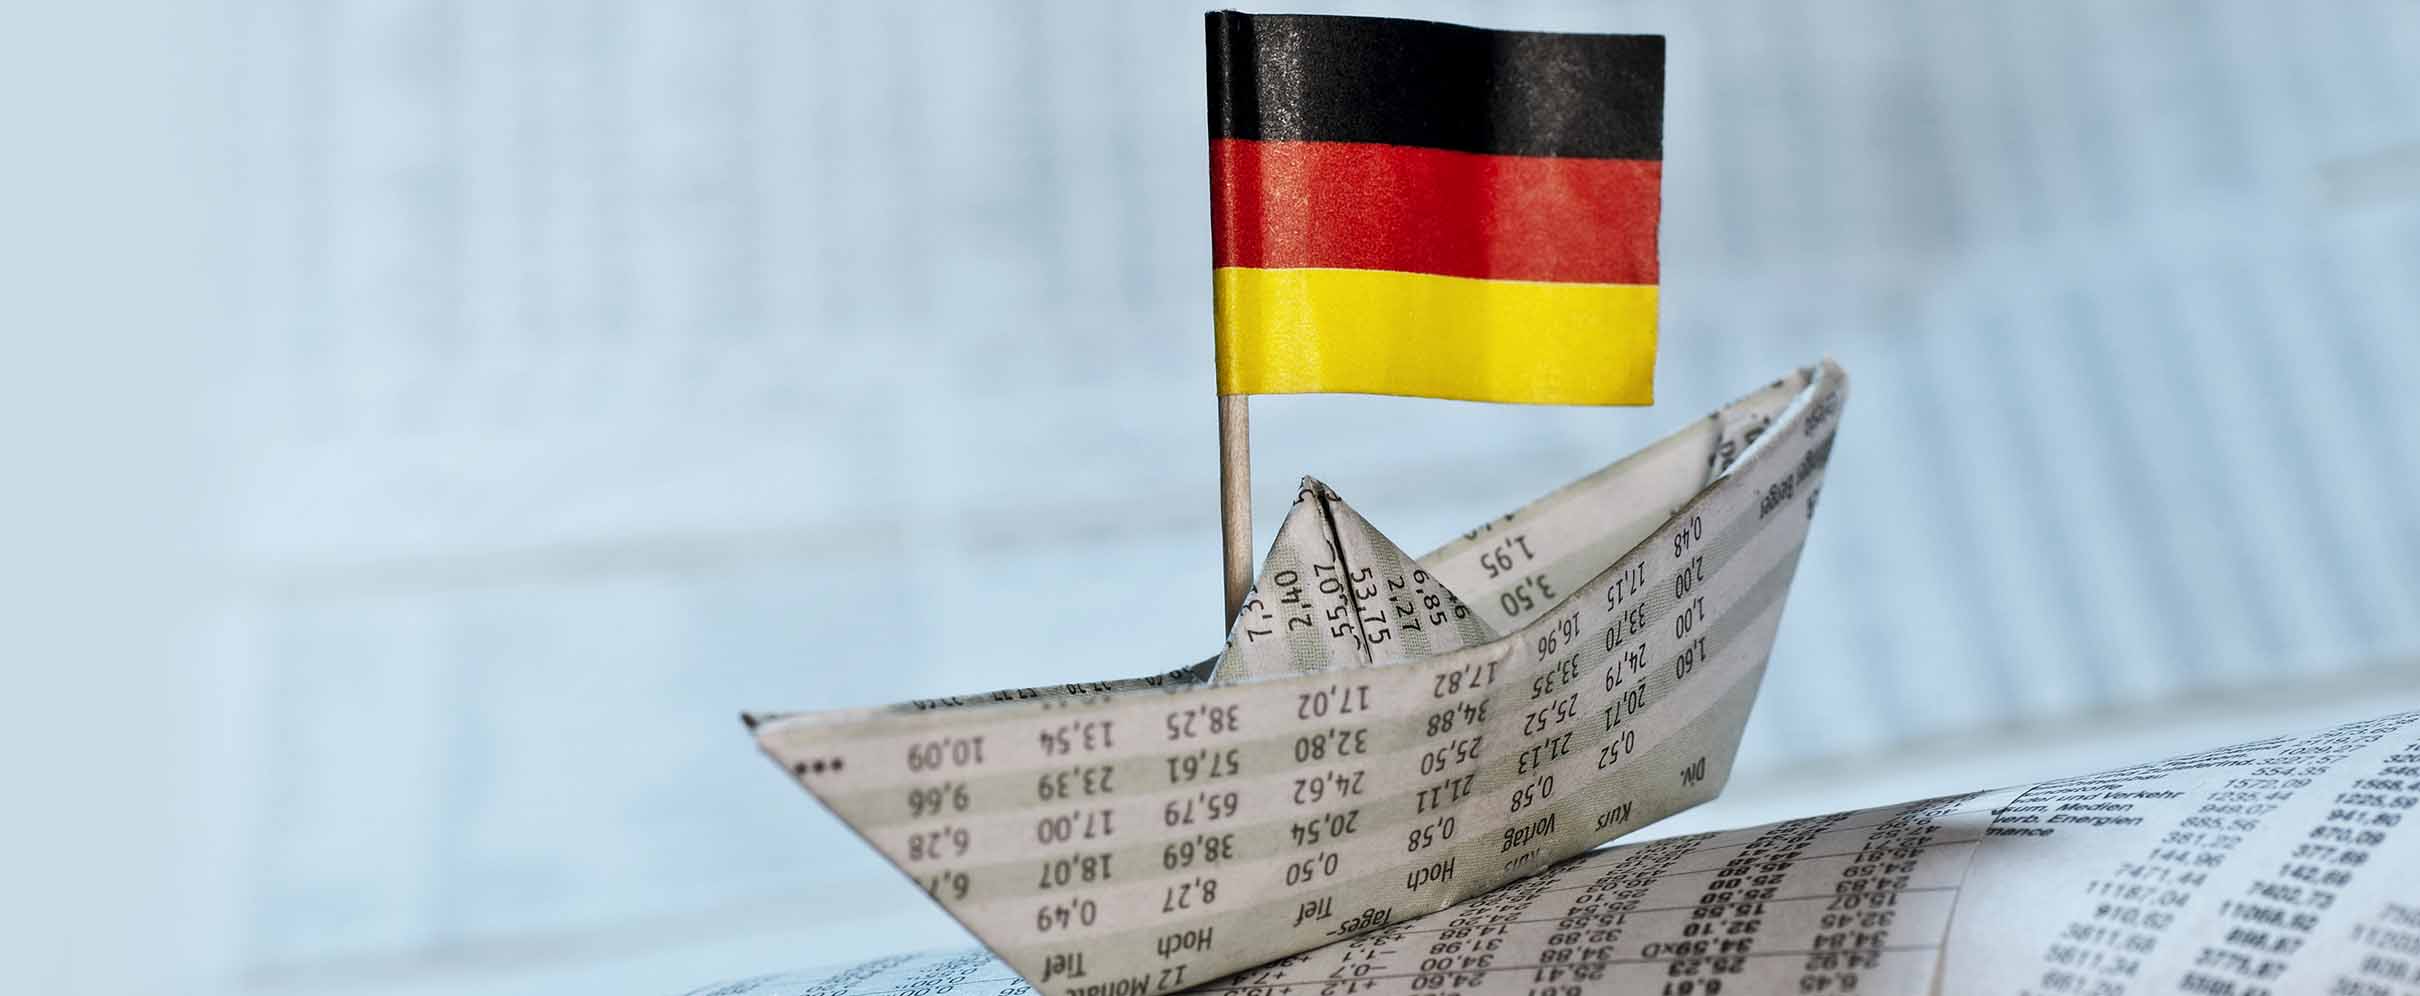 A small paper boat with the German flag.